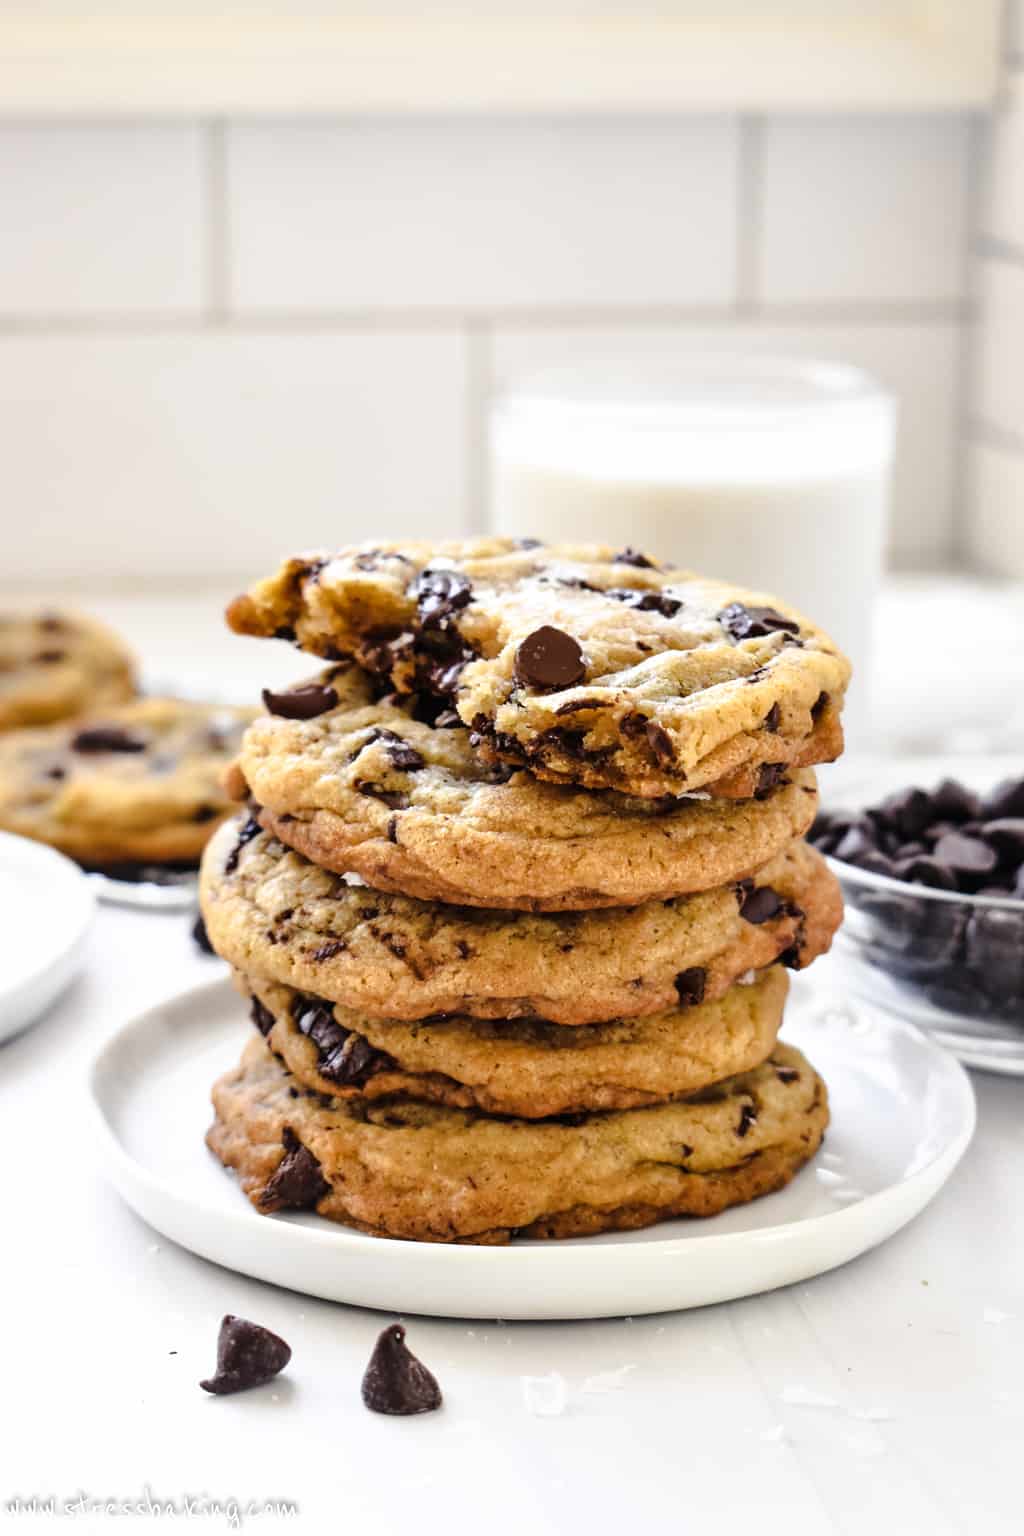 A stack of chocolate chip cookies on a small white plate in front of a glass of milk